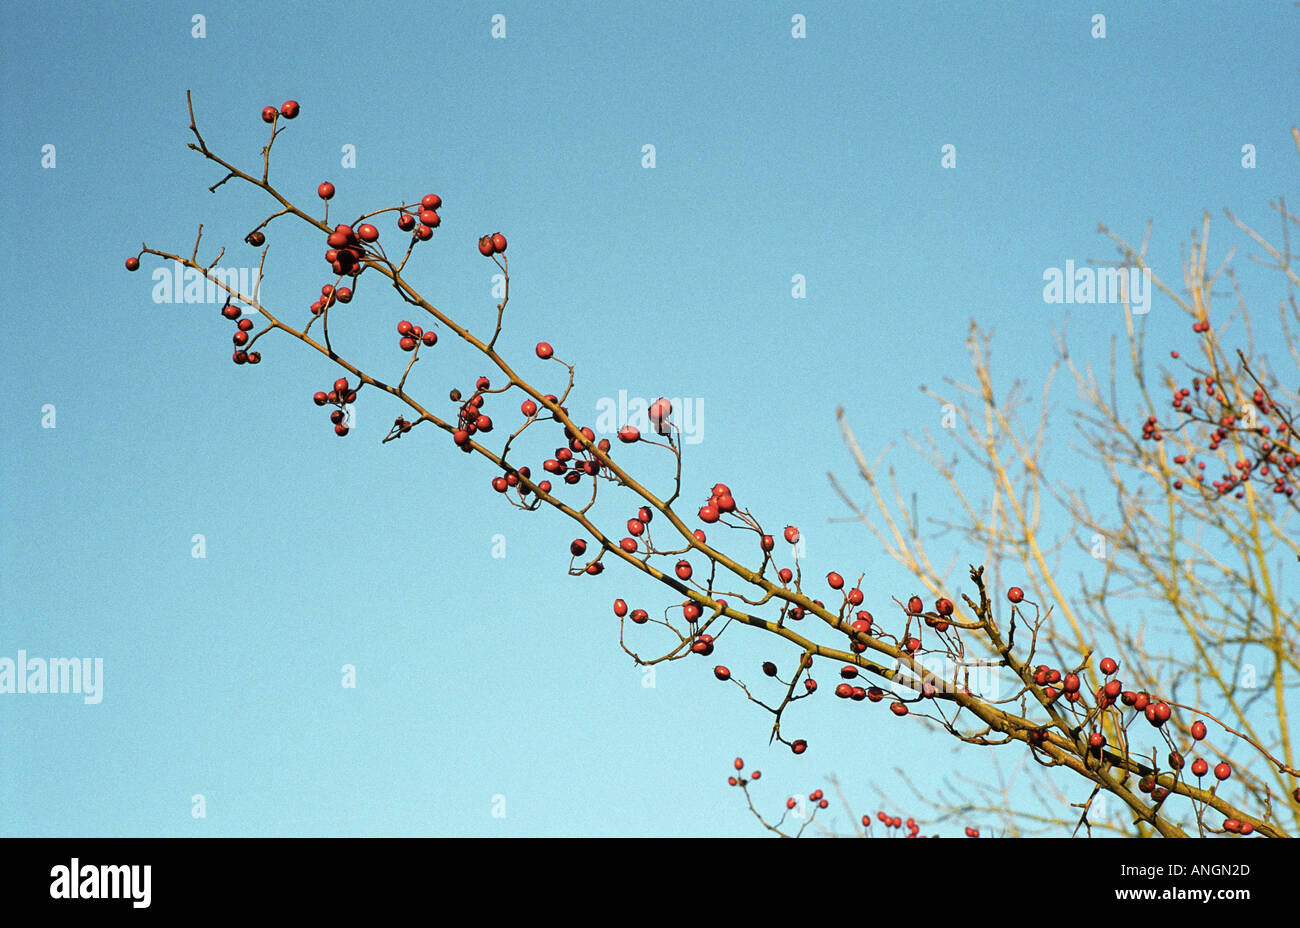 winter berries against clear blue sky Stock Photo